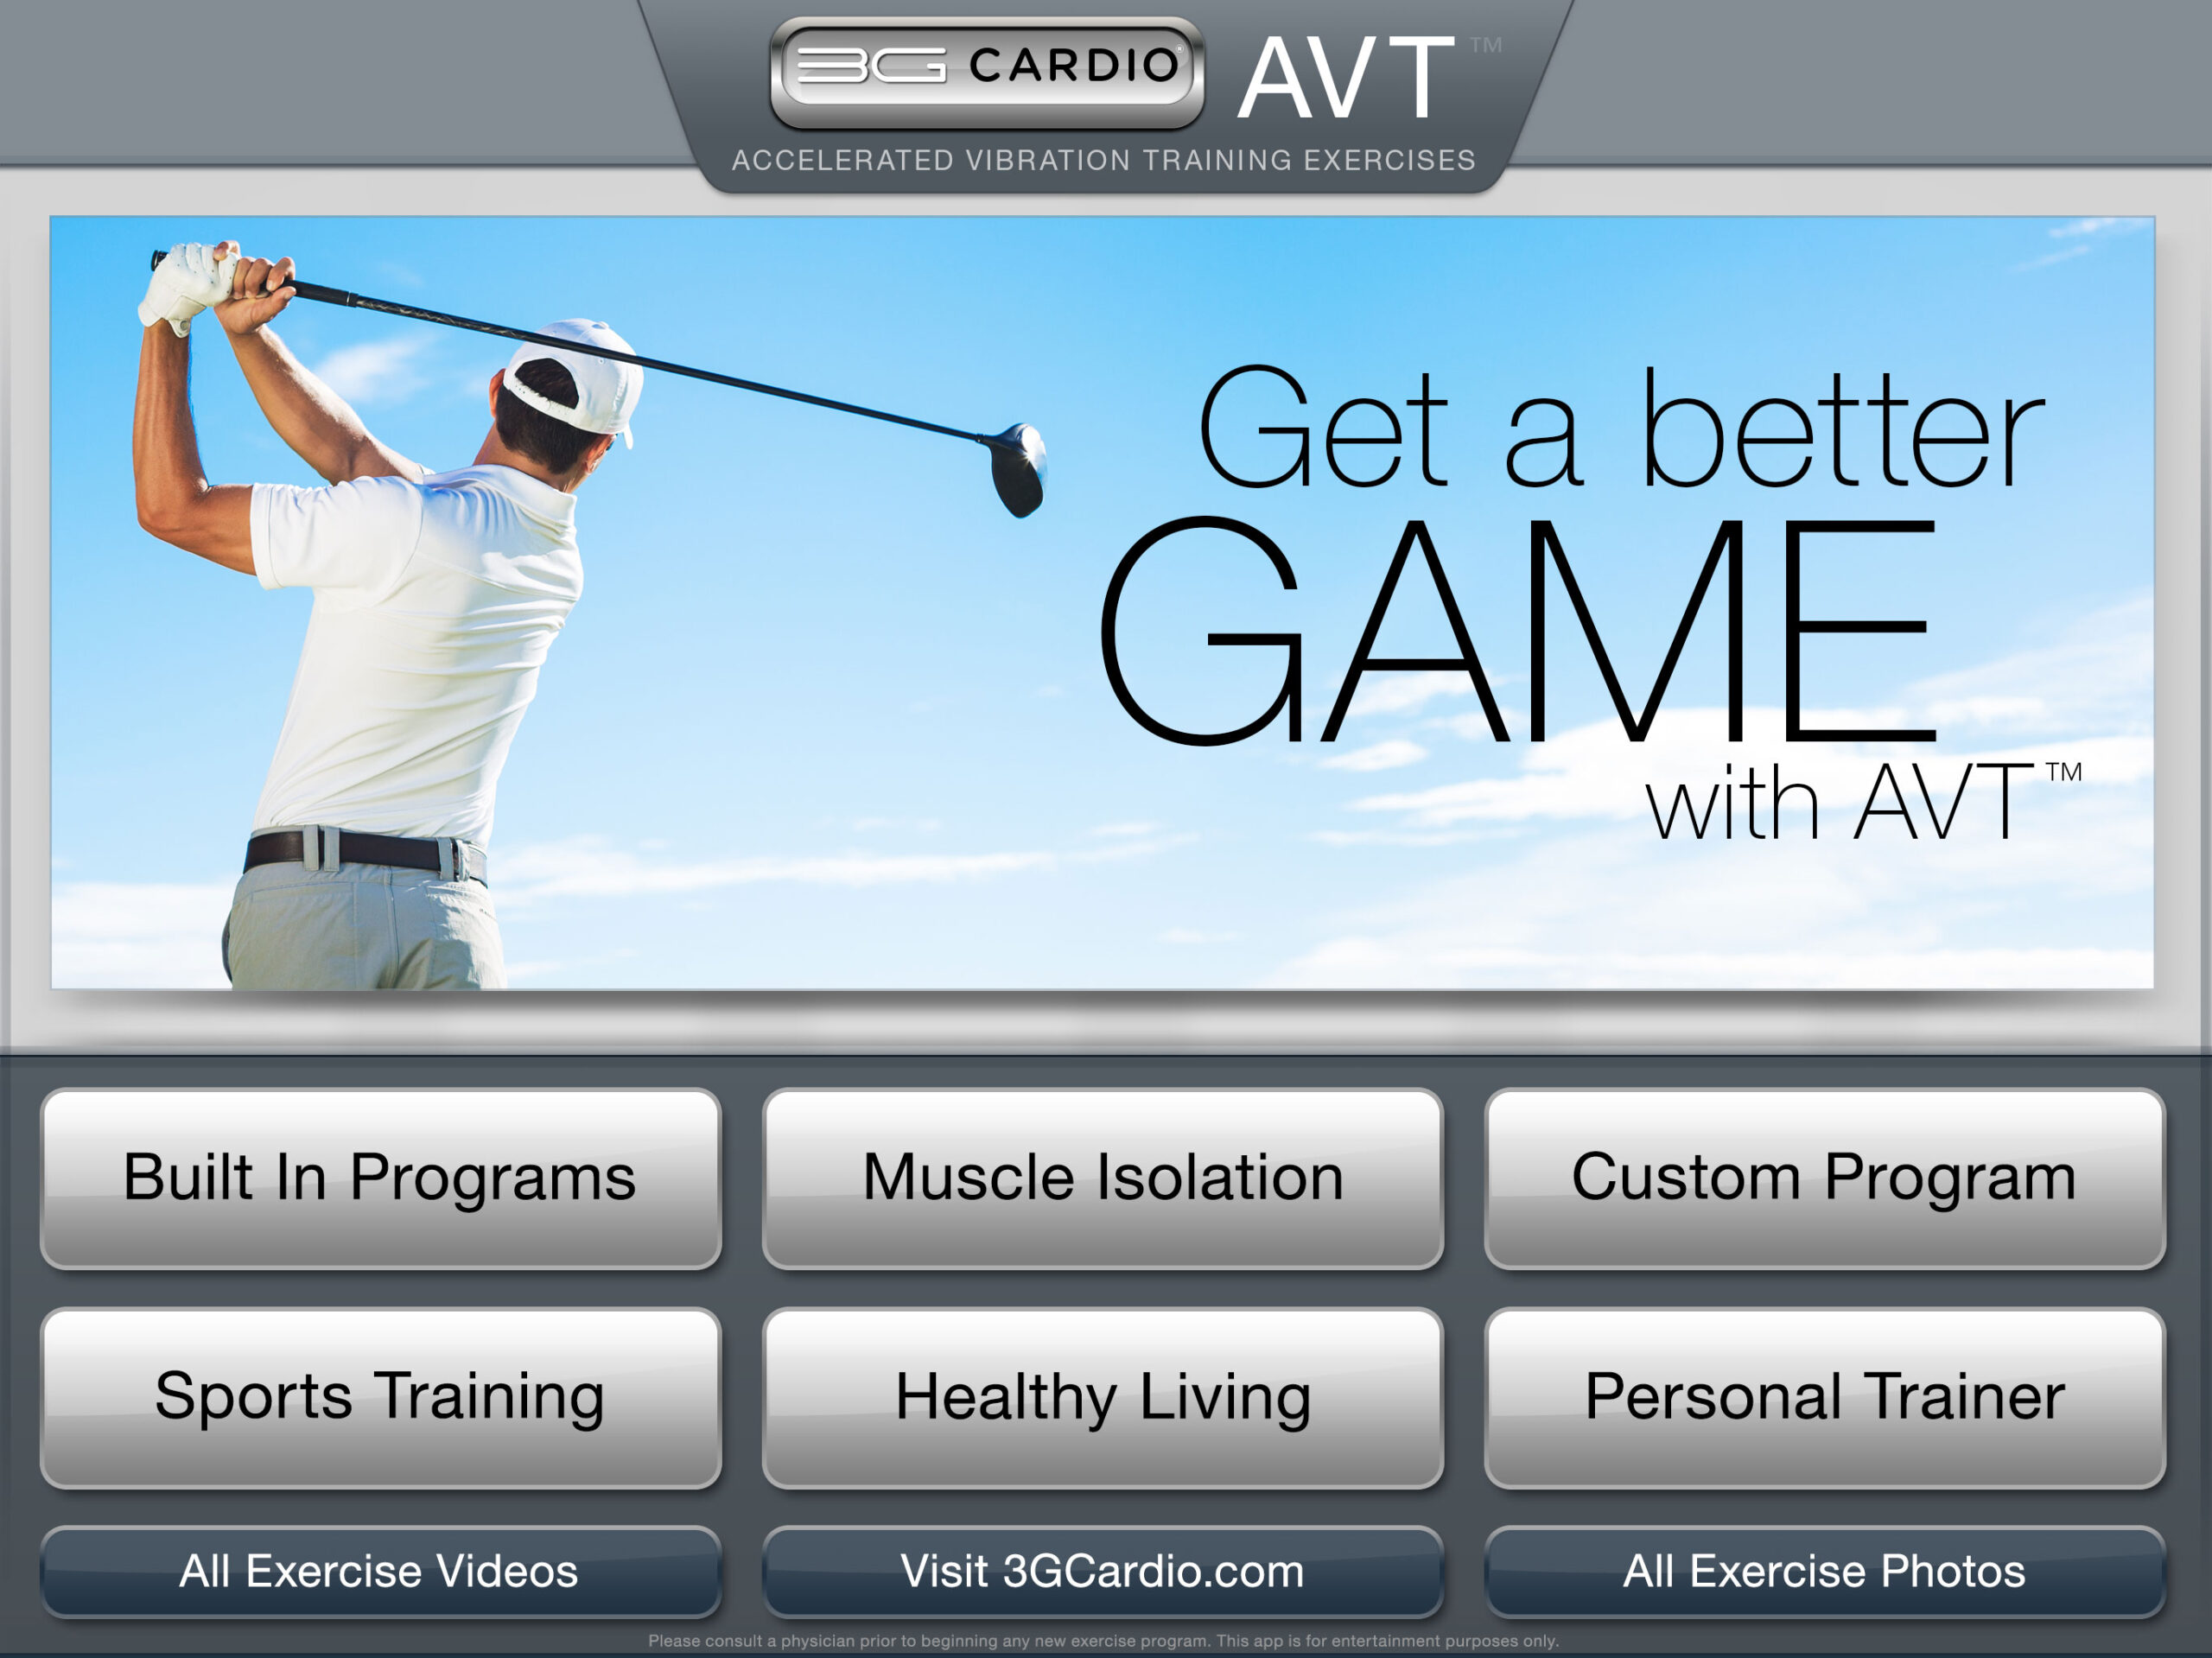 3G Cardio has awesome App for Vibration Training